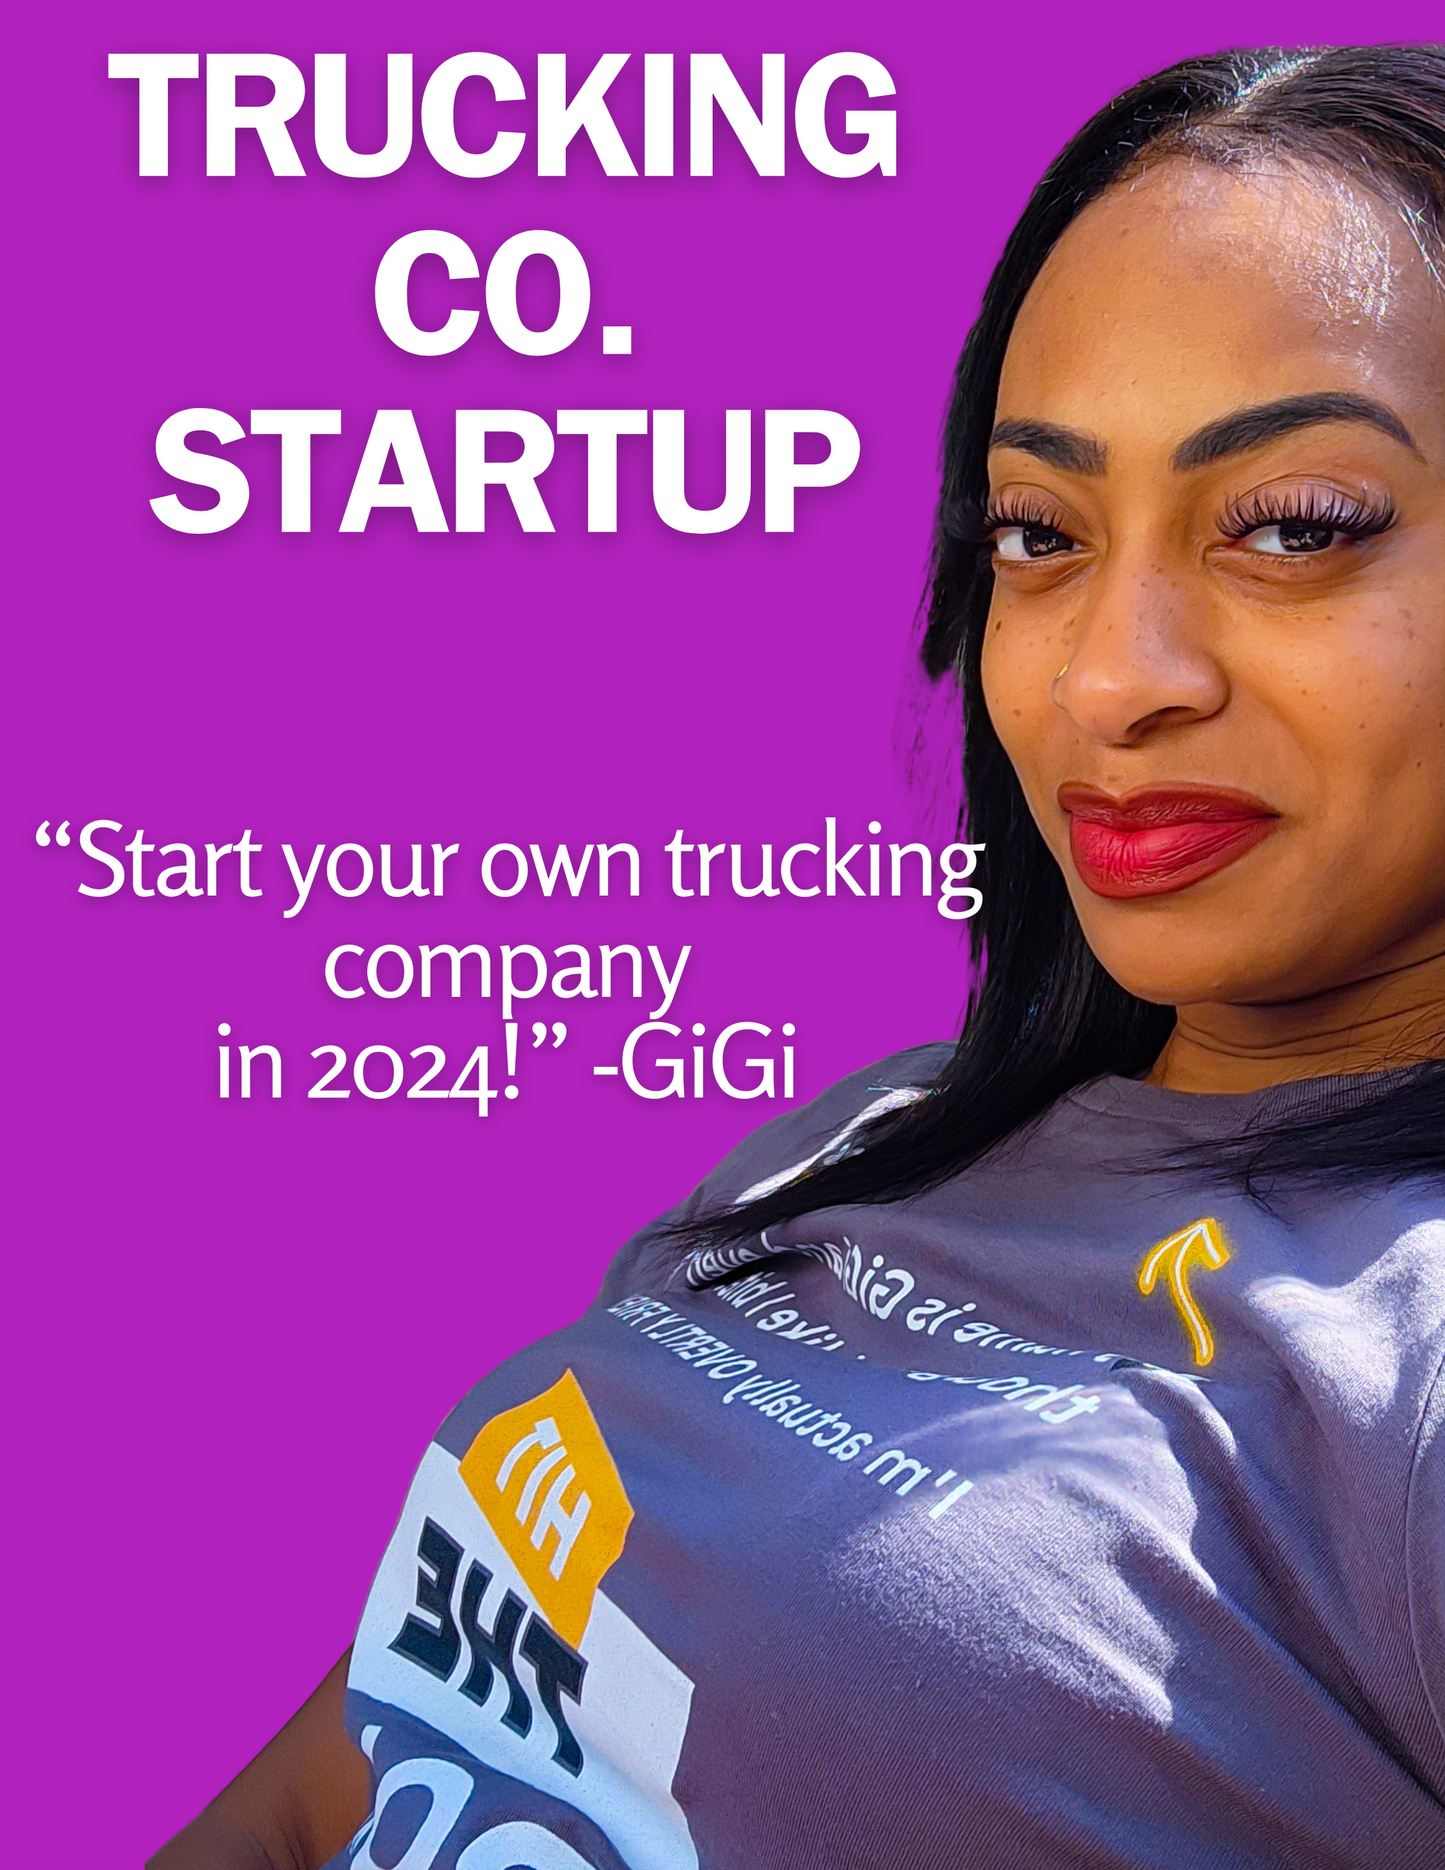 TRUCKING CO. STARTUP